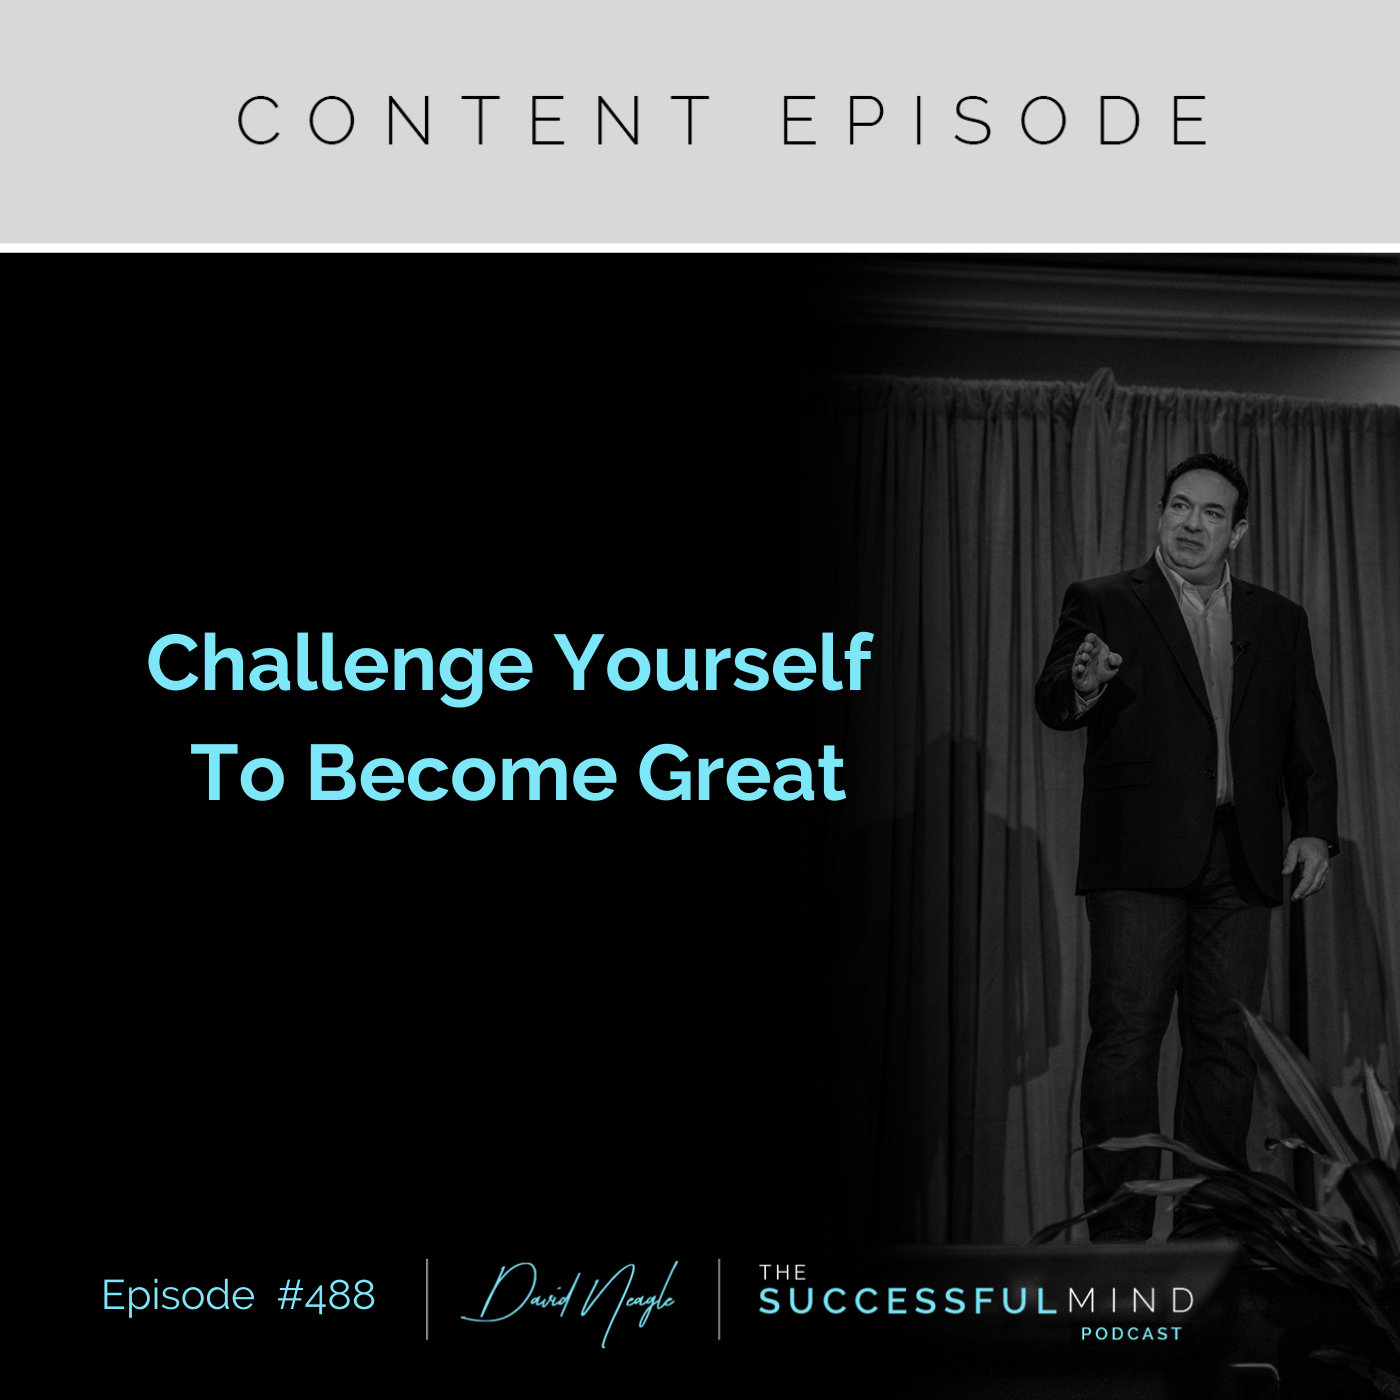 The Successful Mind Podcast - Episode 488 - Challenge Yourself To Become Great